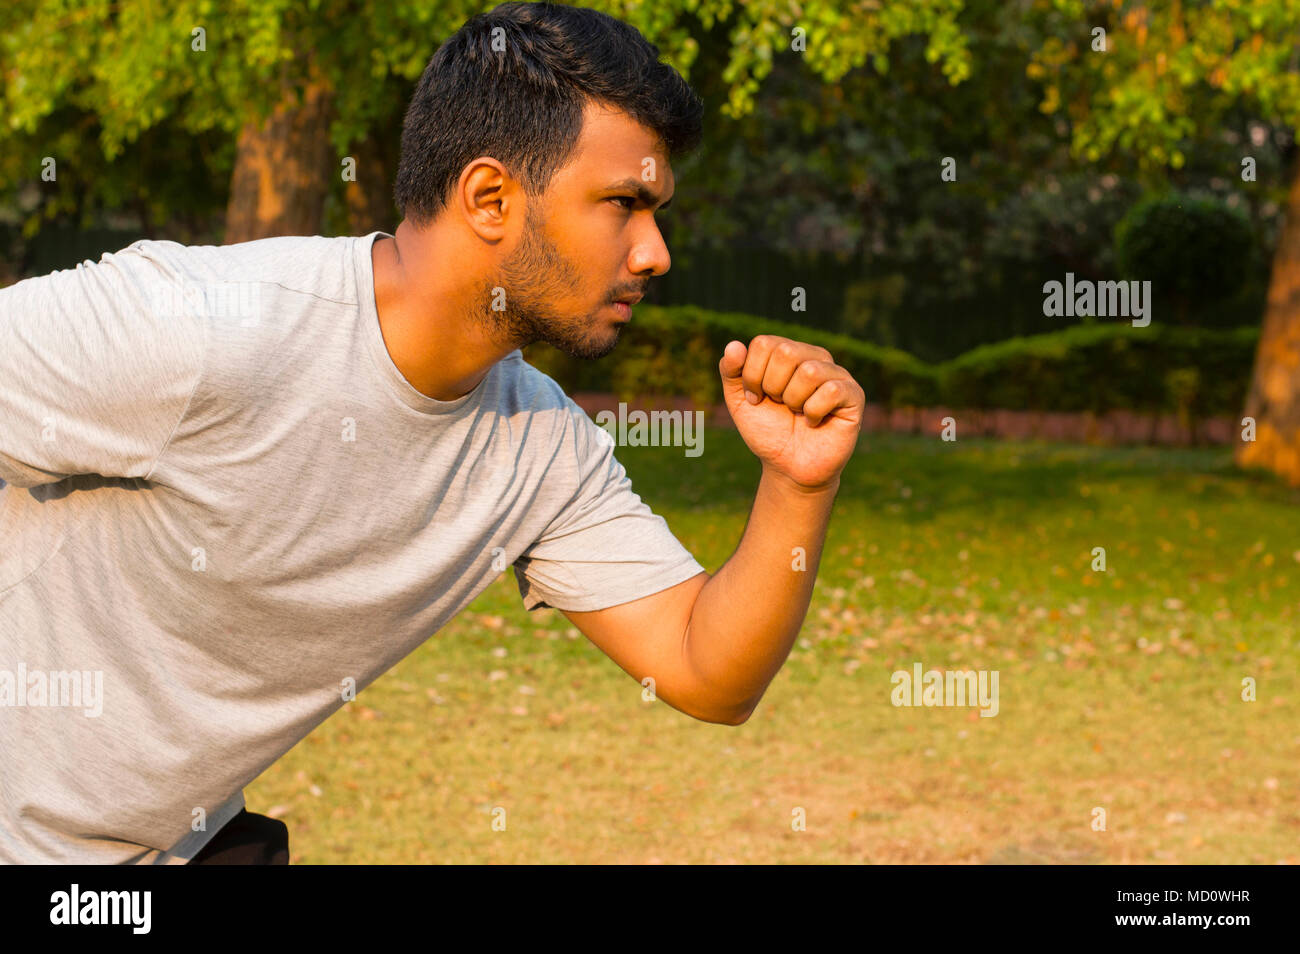 Close-up of a athlete in the ready position before going for a run Stock Photo